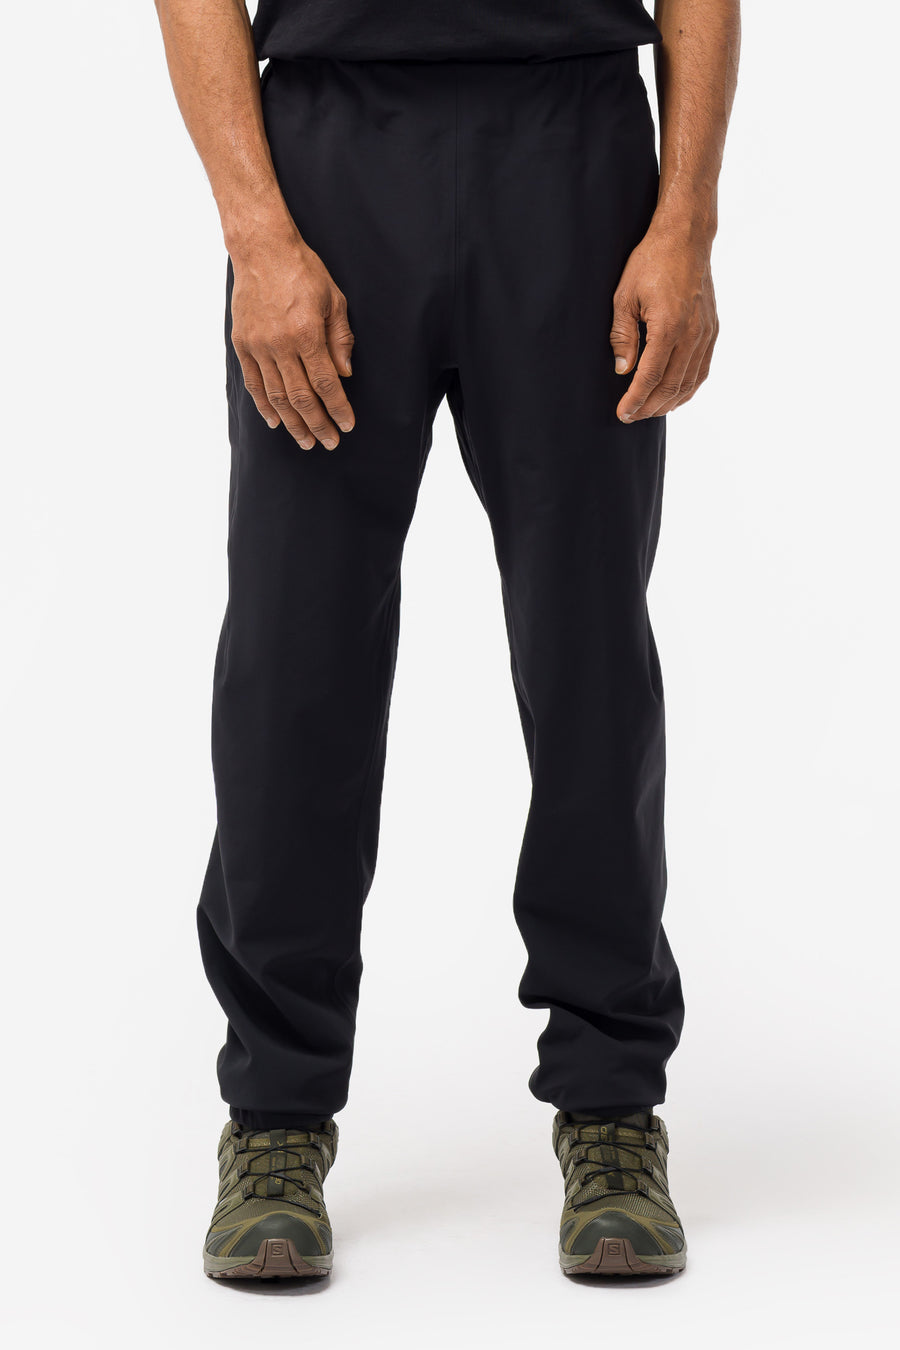 VEILANCE SECANT HEAVY WEIGHT PANT Size:M residencialchavedouro.pt